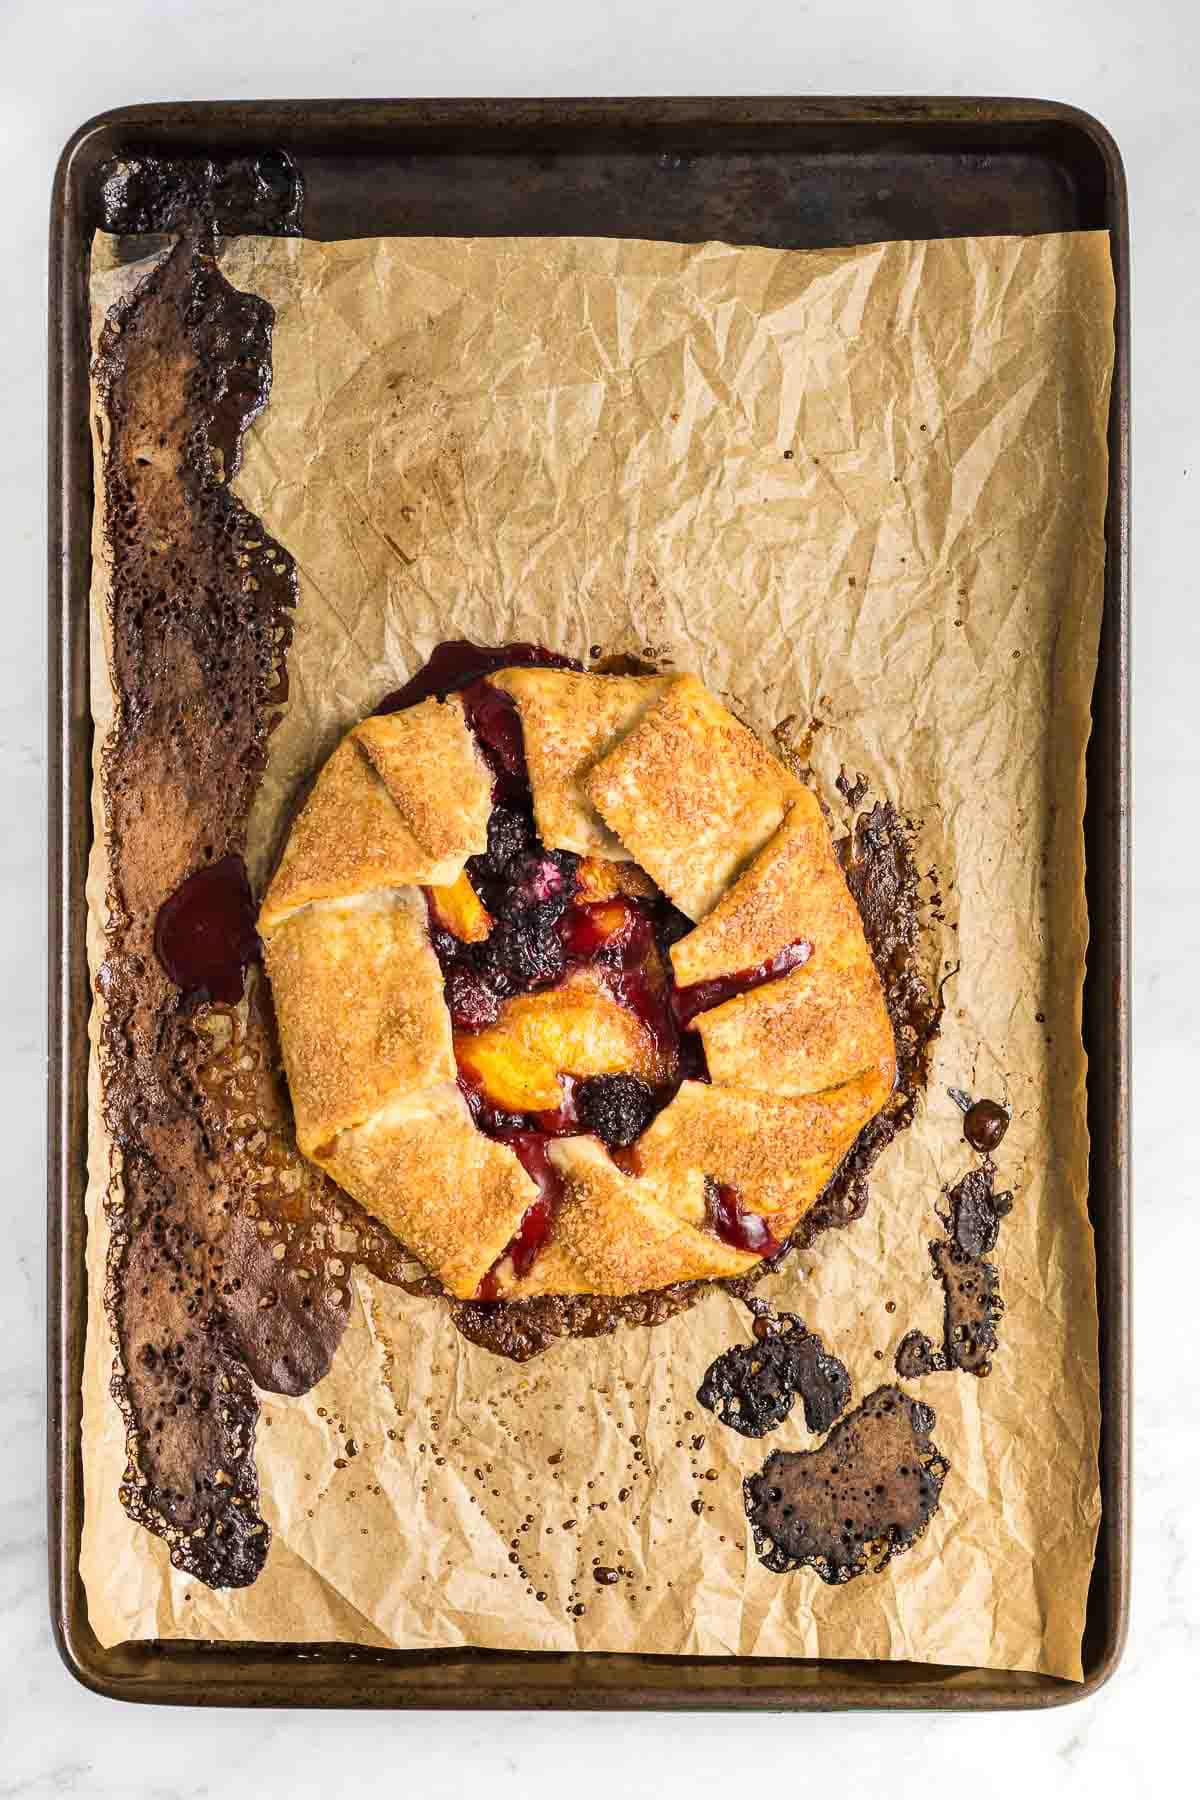 A rustic fruit galette with a golden brown crust sits on a crumpled piece of parchment paper on a baking sheet. Some fruit filling has oozed out and caramelized on the paper and baking sheet.